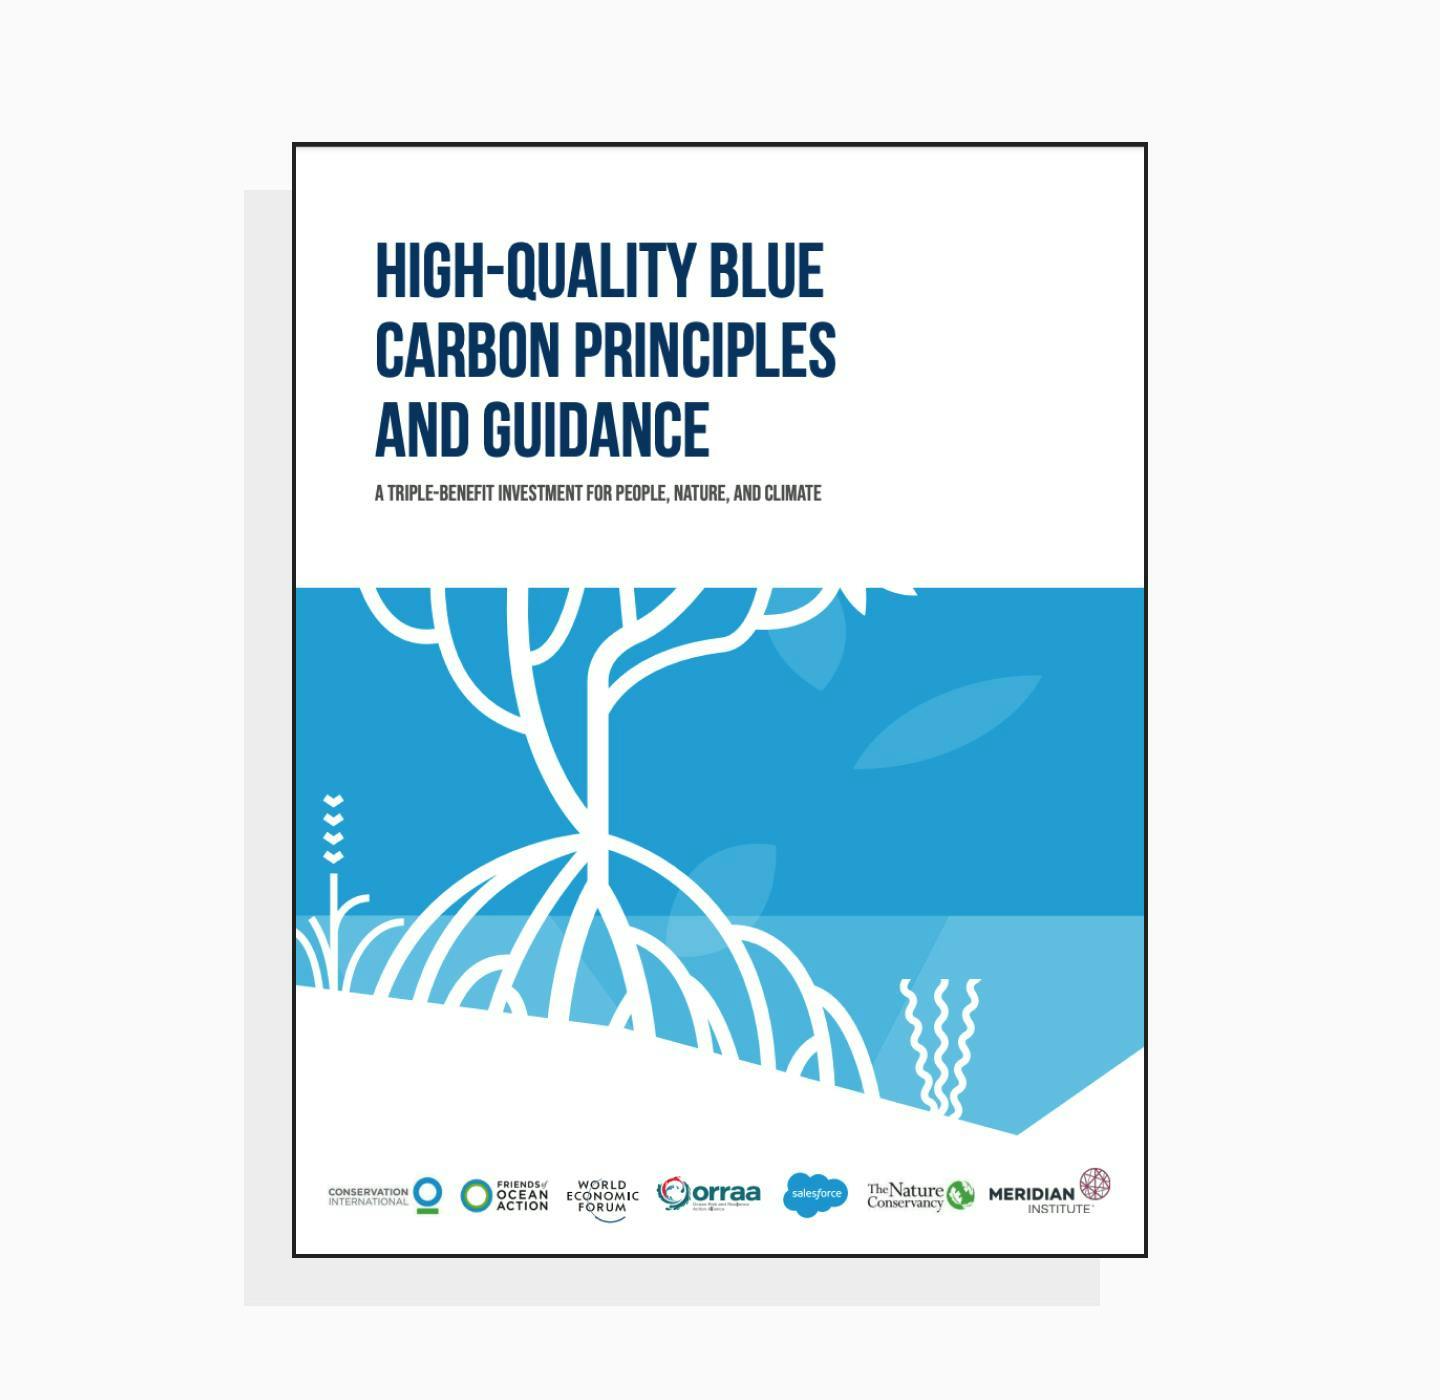 High-quality blue carbon principles and guidance